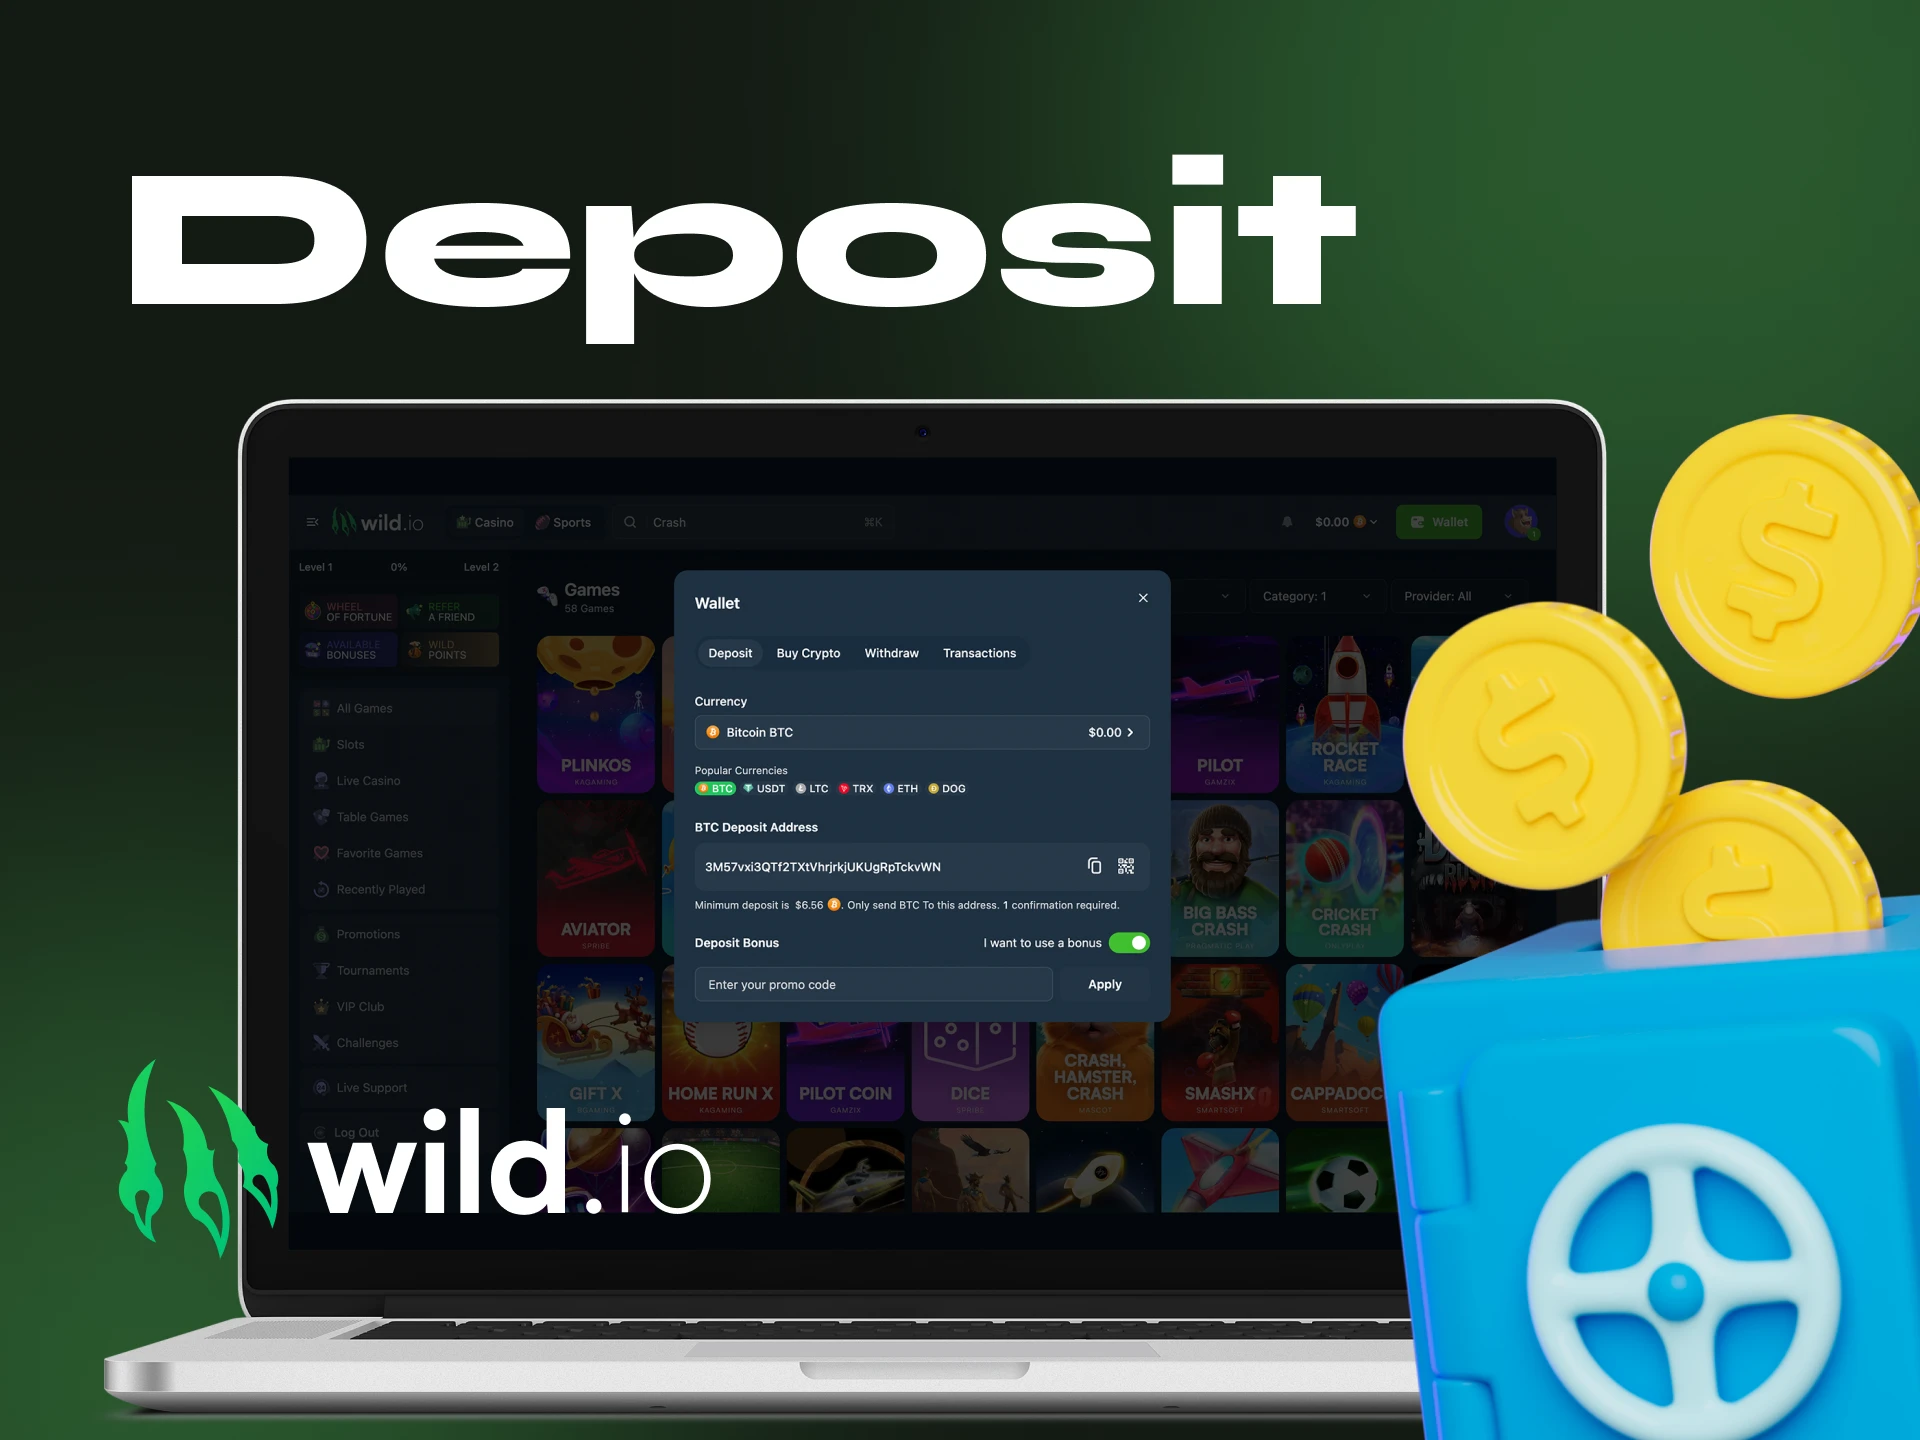 What a user needs to do to make a deposit at the Wildio online casino.